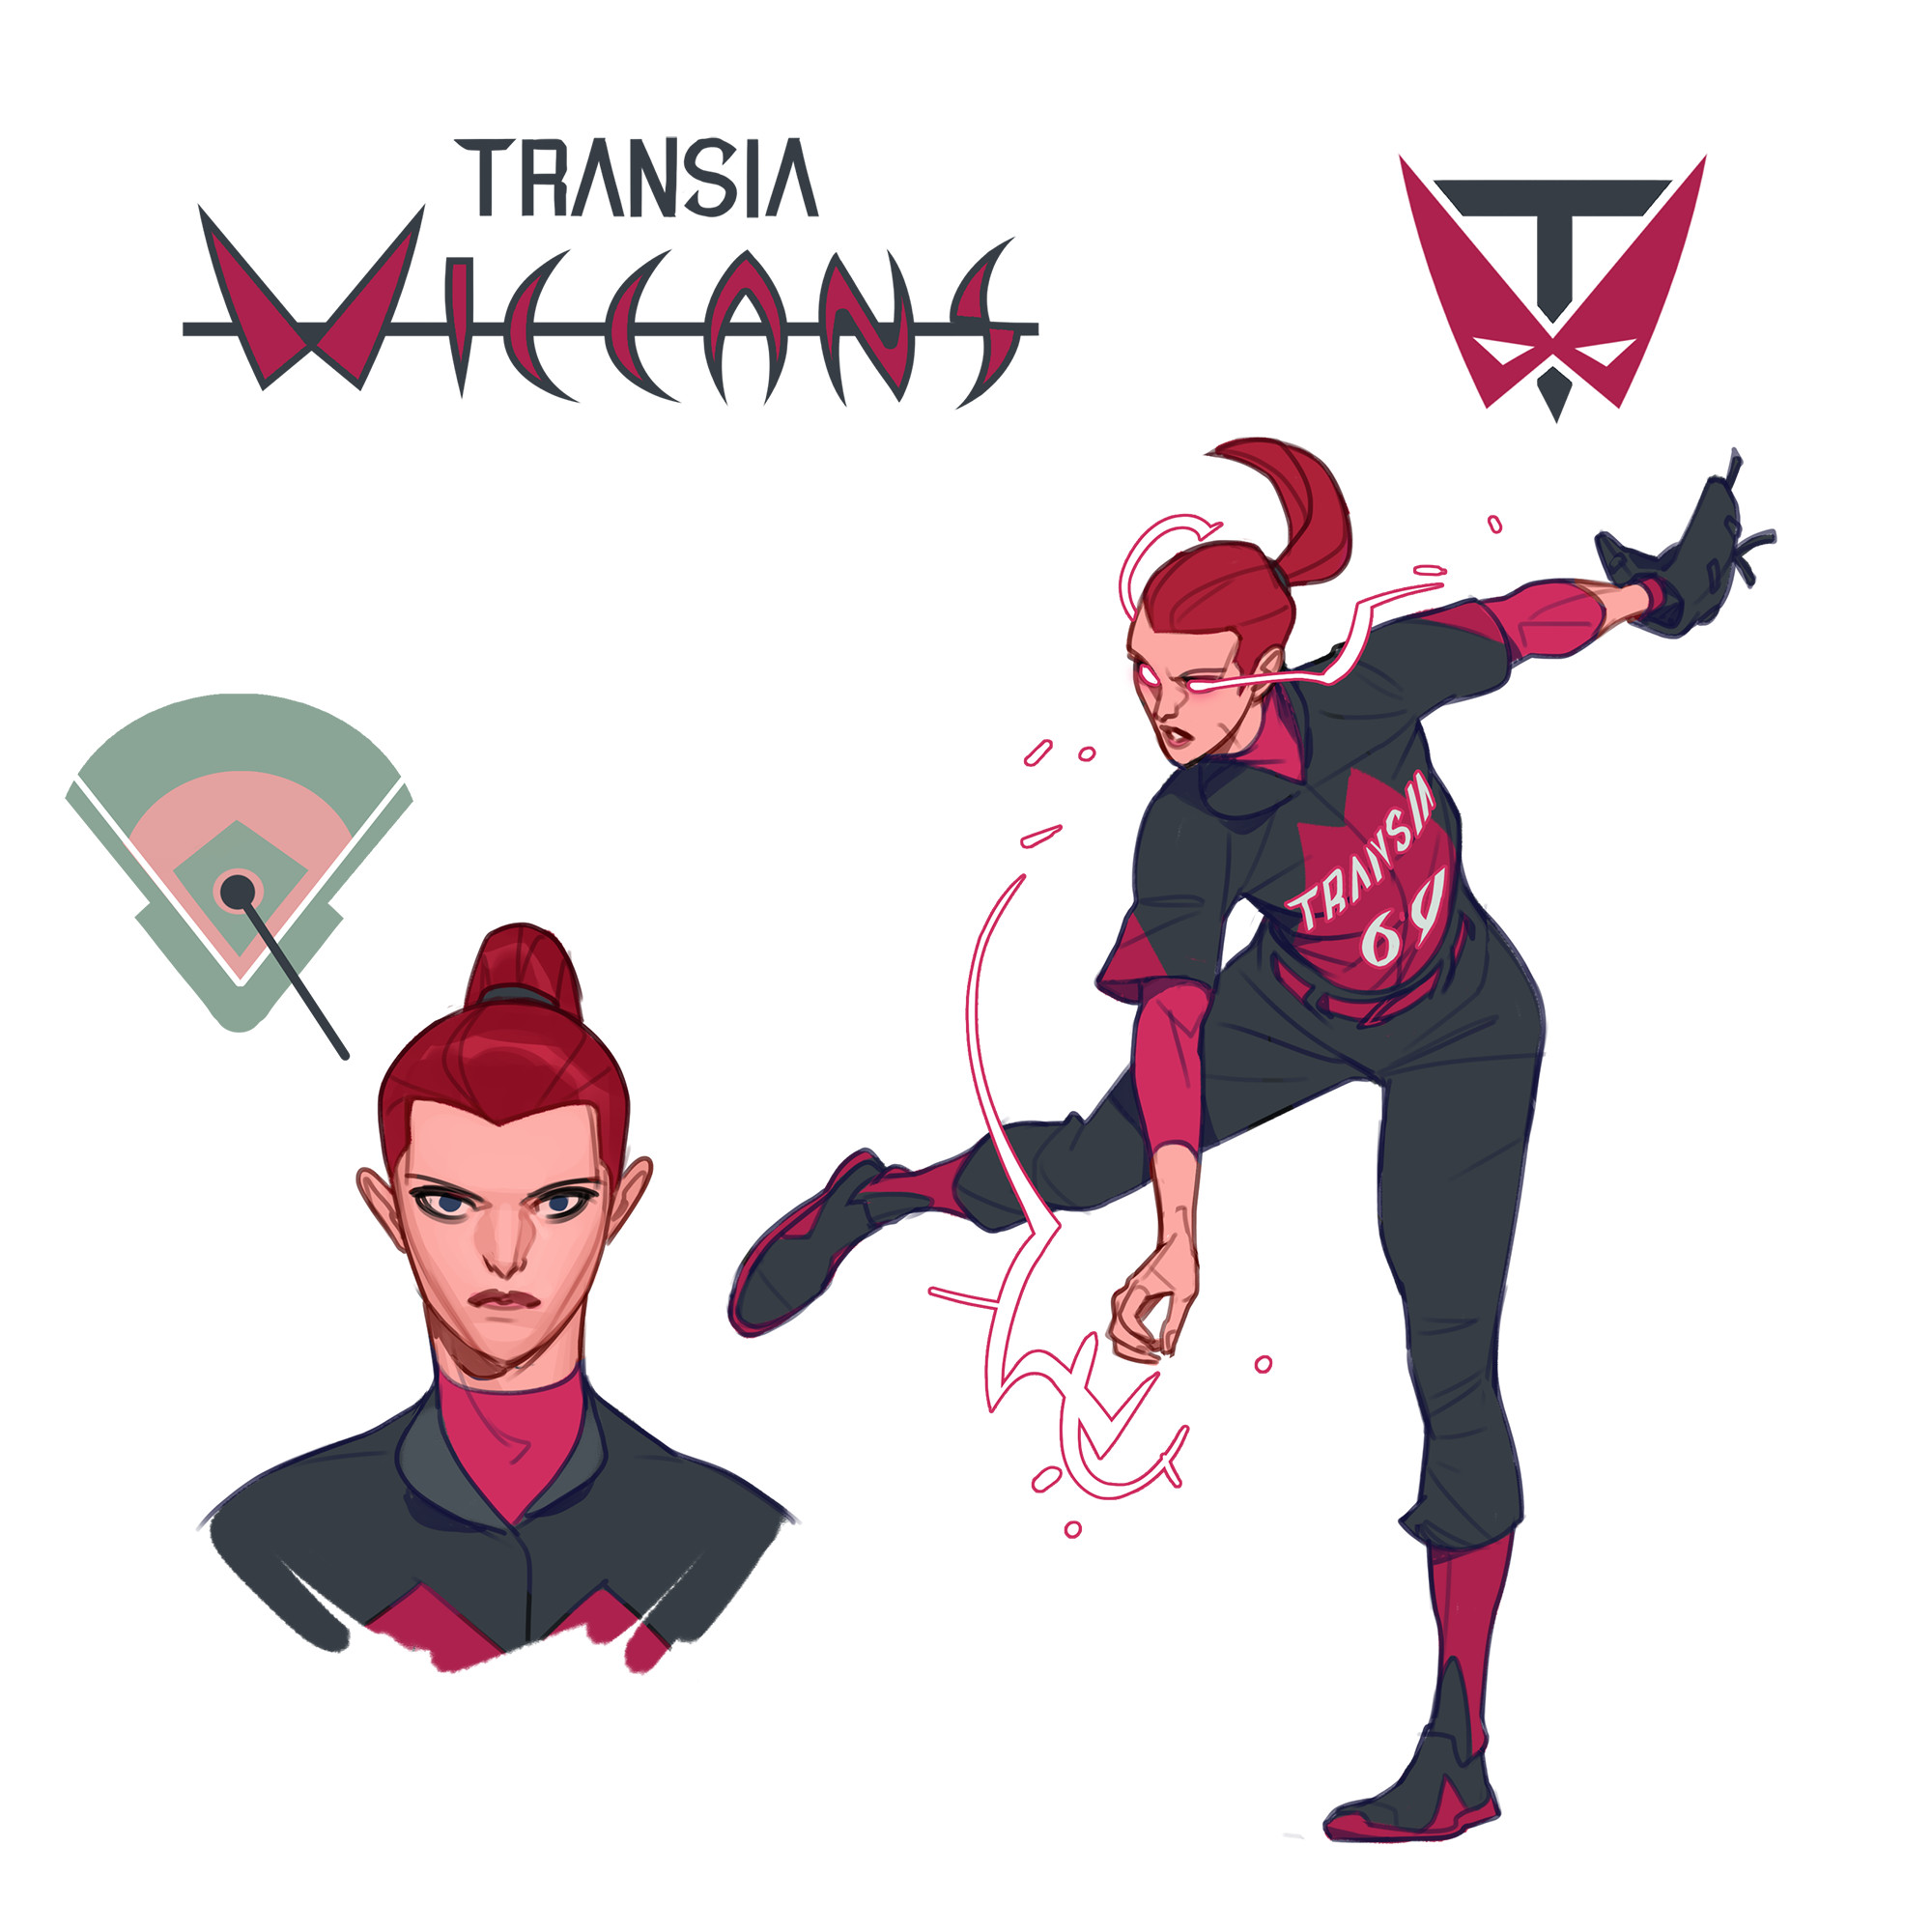 The Transia Wiccans!